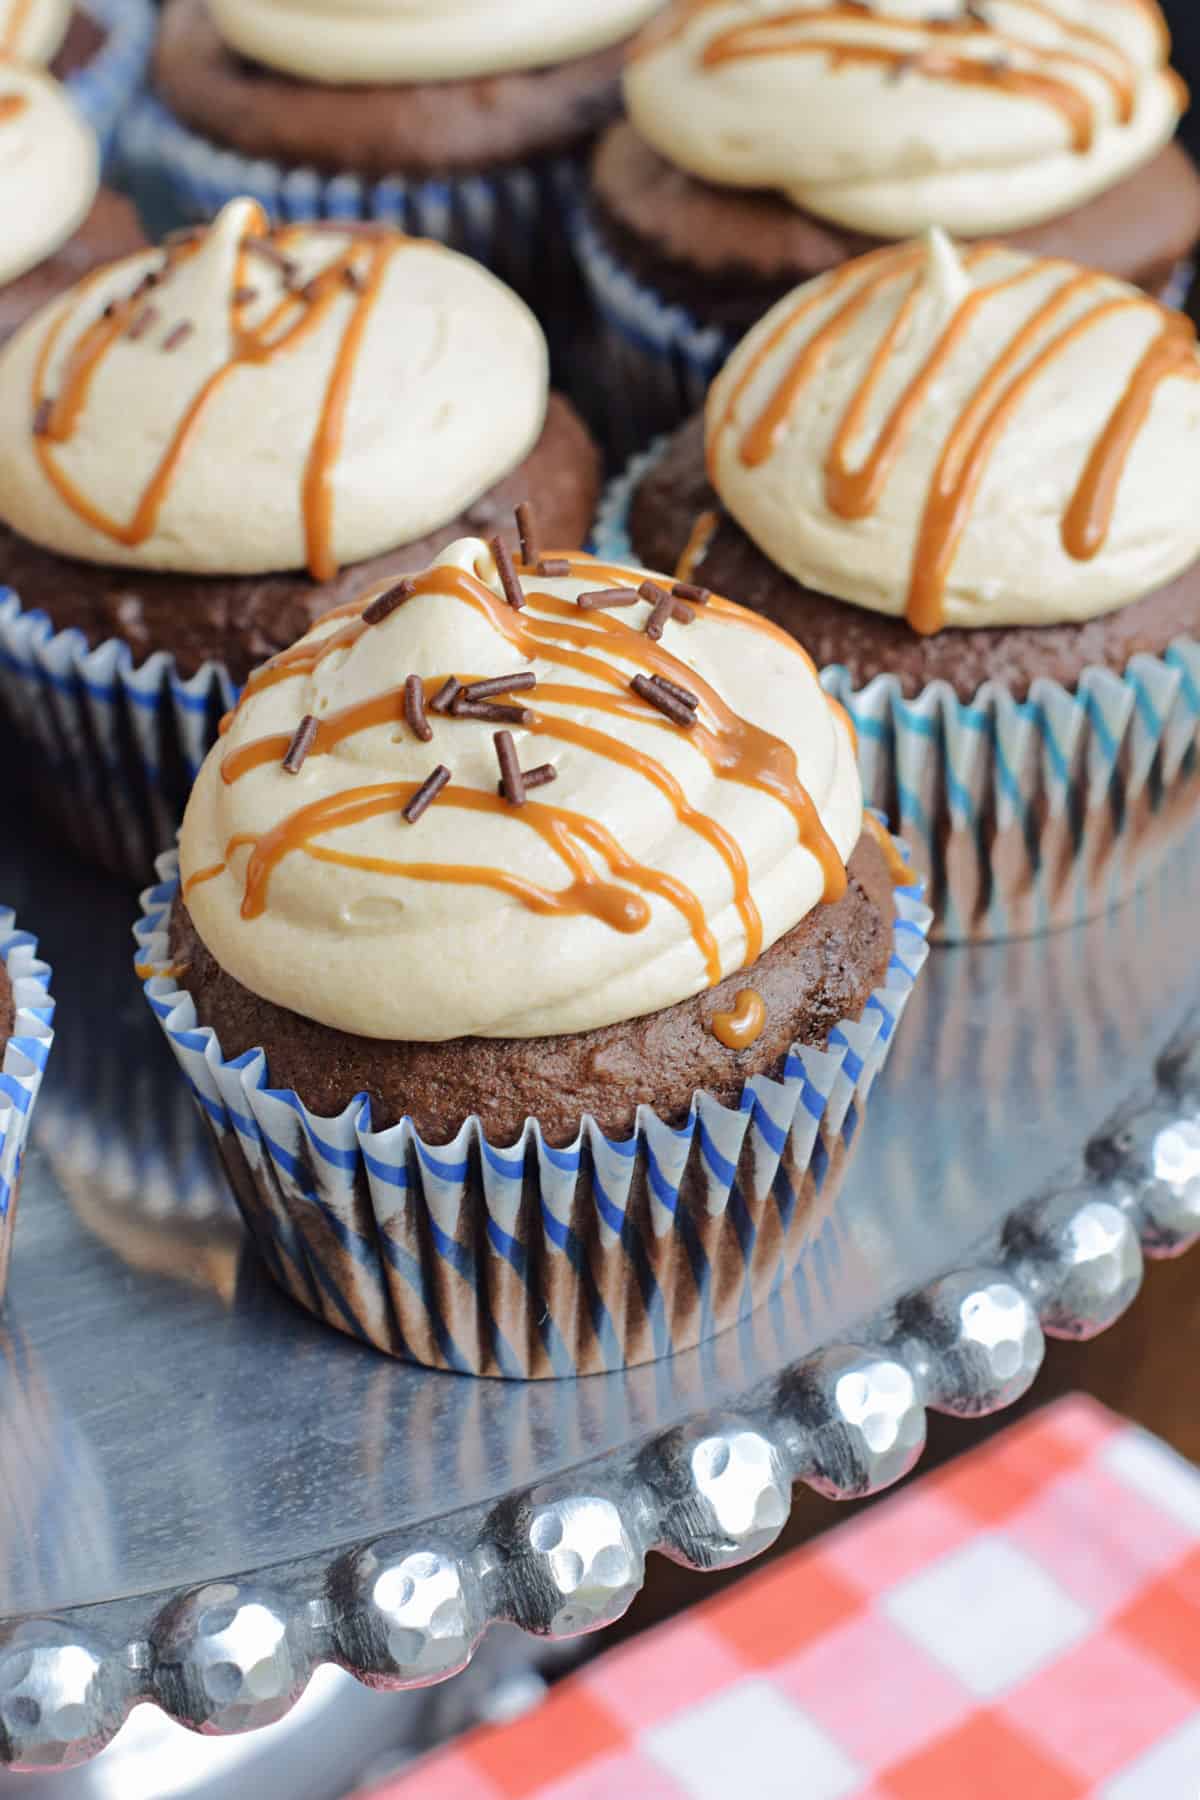 Chocolate cupcakes with biscoff frosting on a metal cake platter.